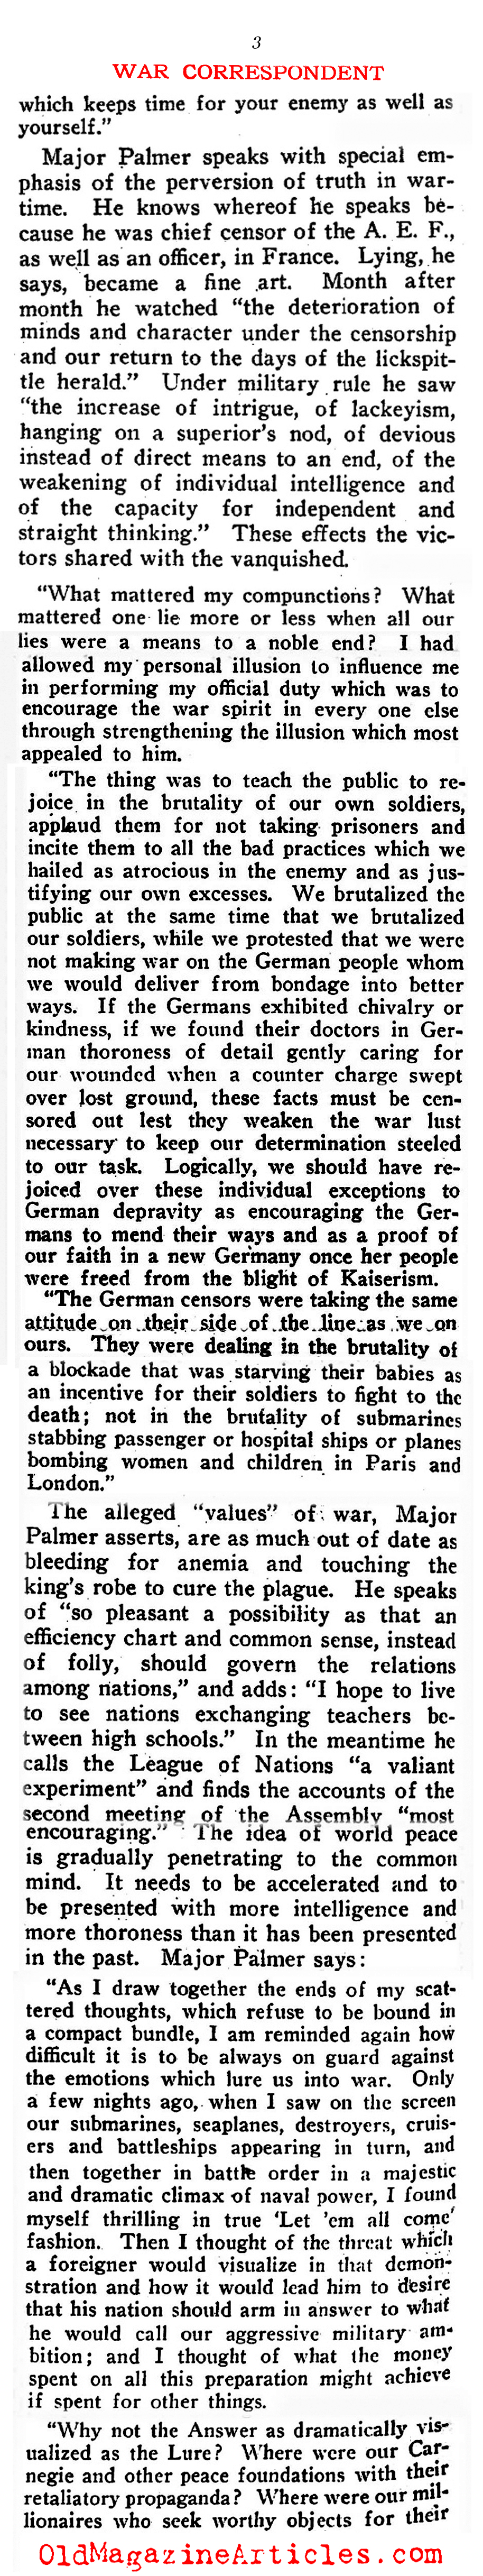  Another War Correspondent Remembers With Anger (Current Opinion, 1921)